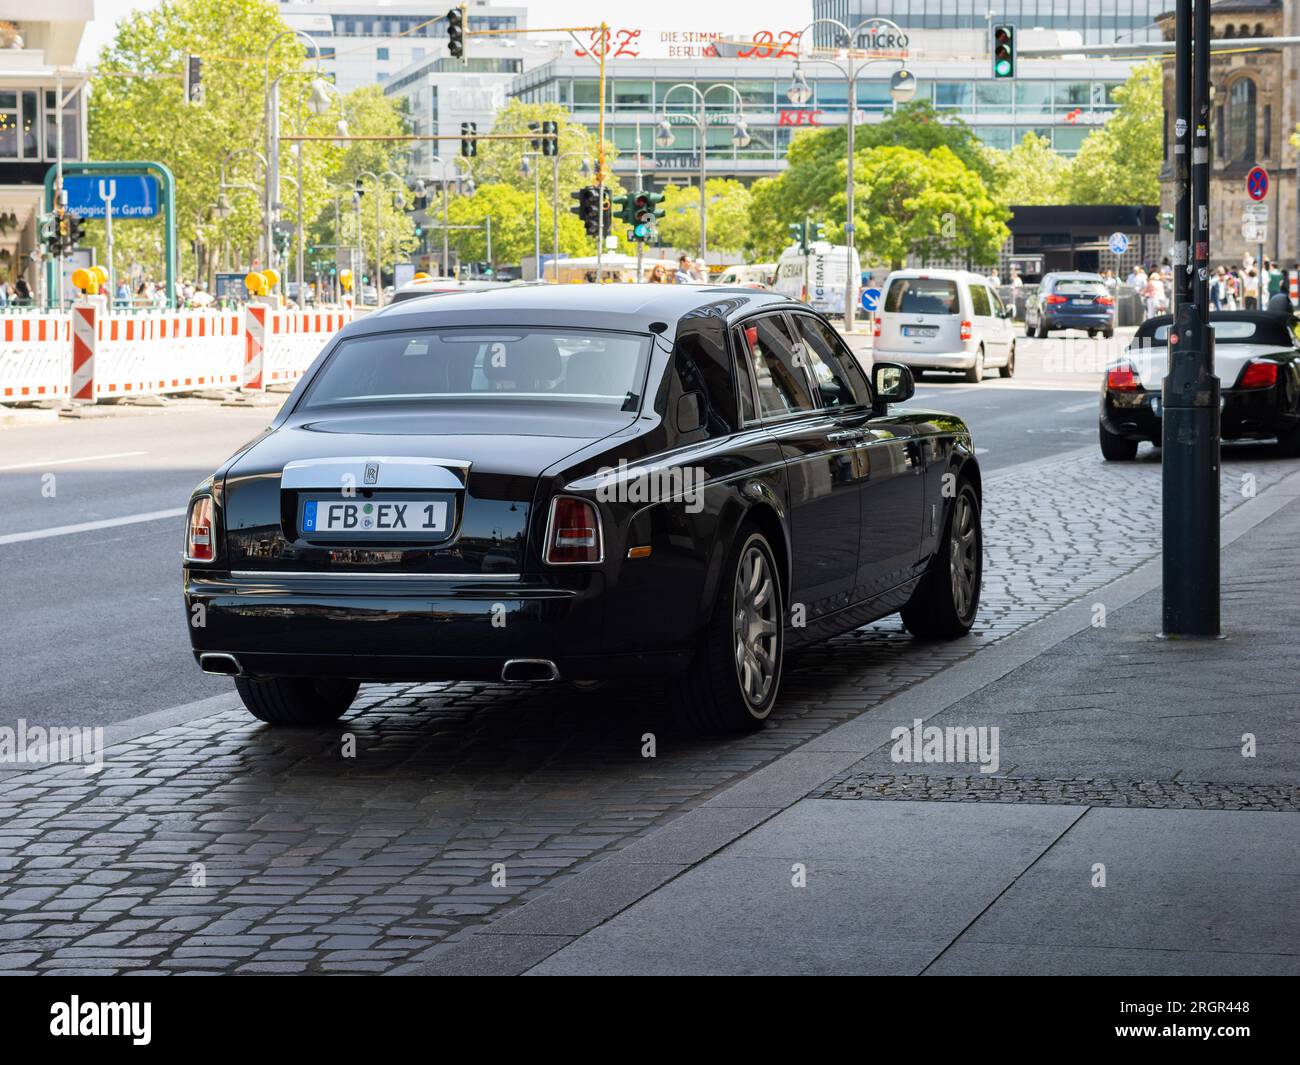 Rear of a Rolls Royce Phantom car. The luxury limousine is parking next to a street in the city. Stock Photo